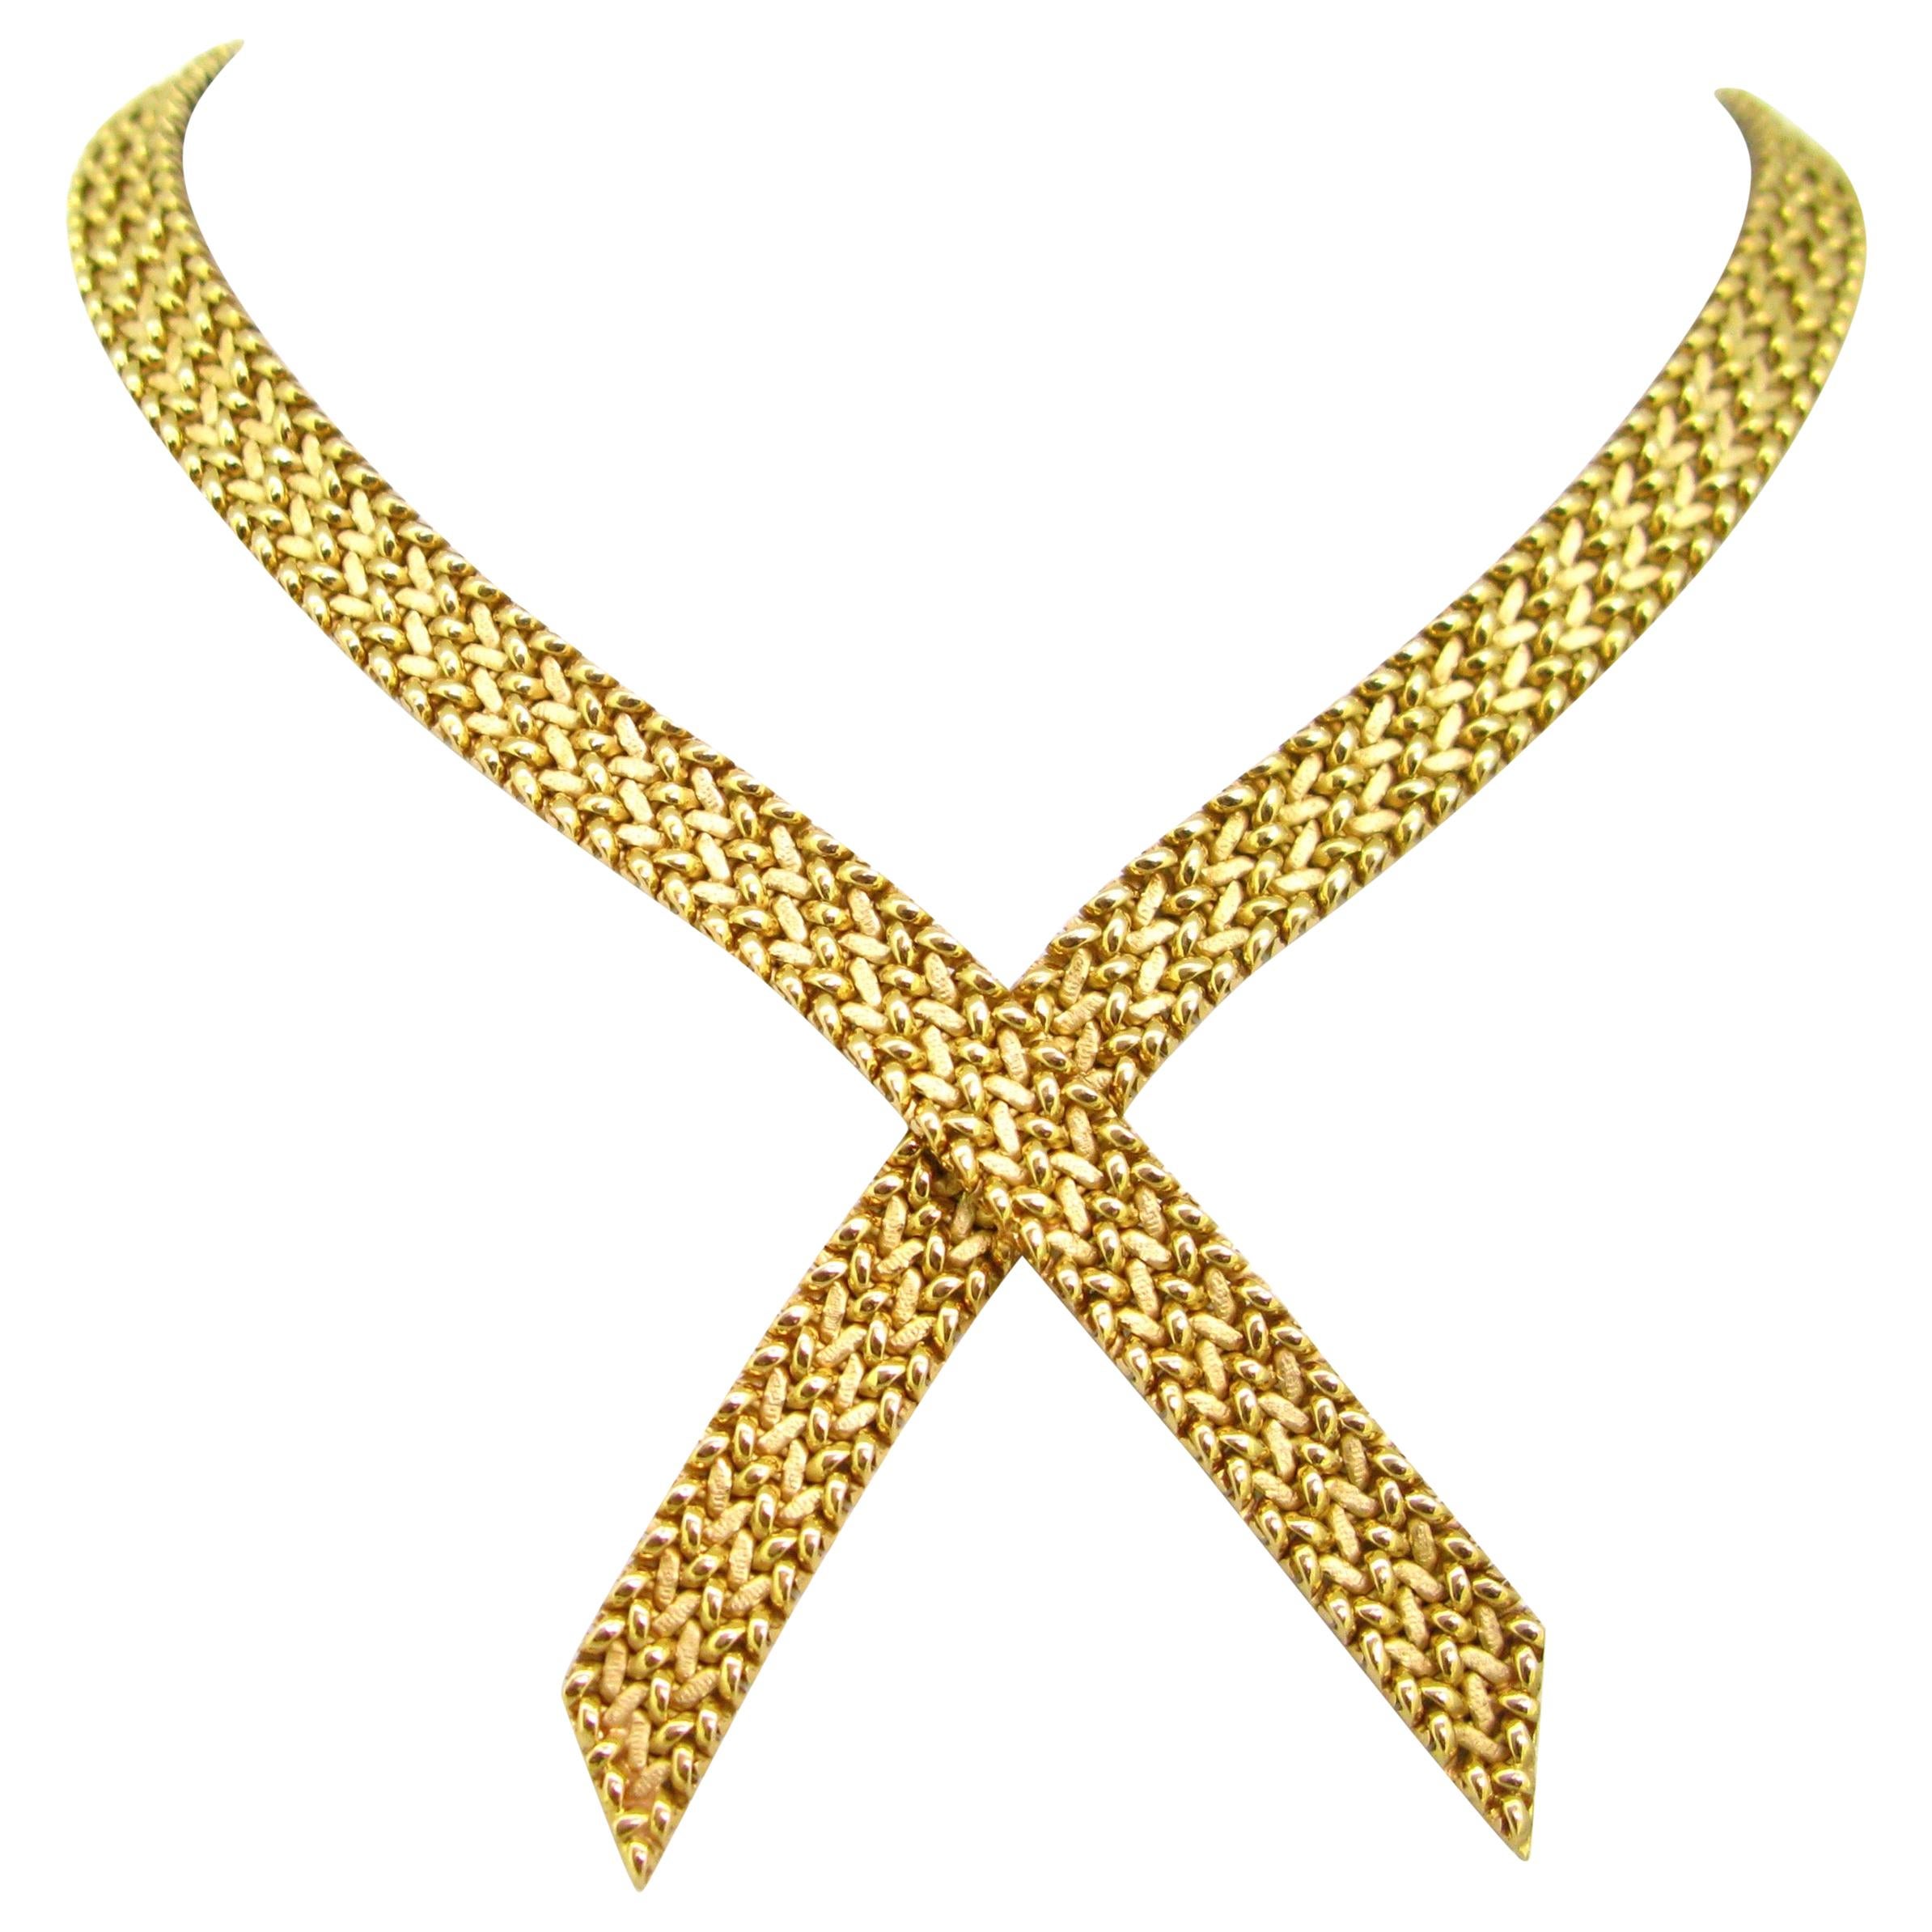 Woven Mesh Yellow Gold Necklace